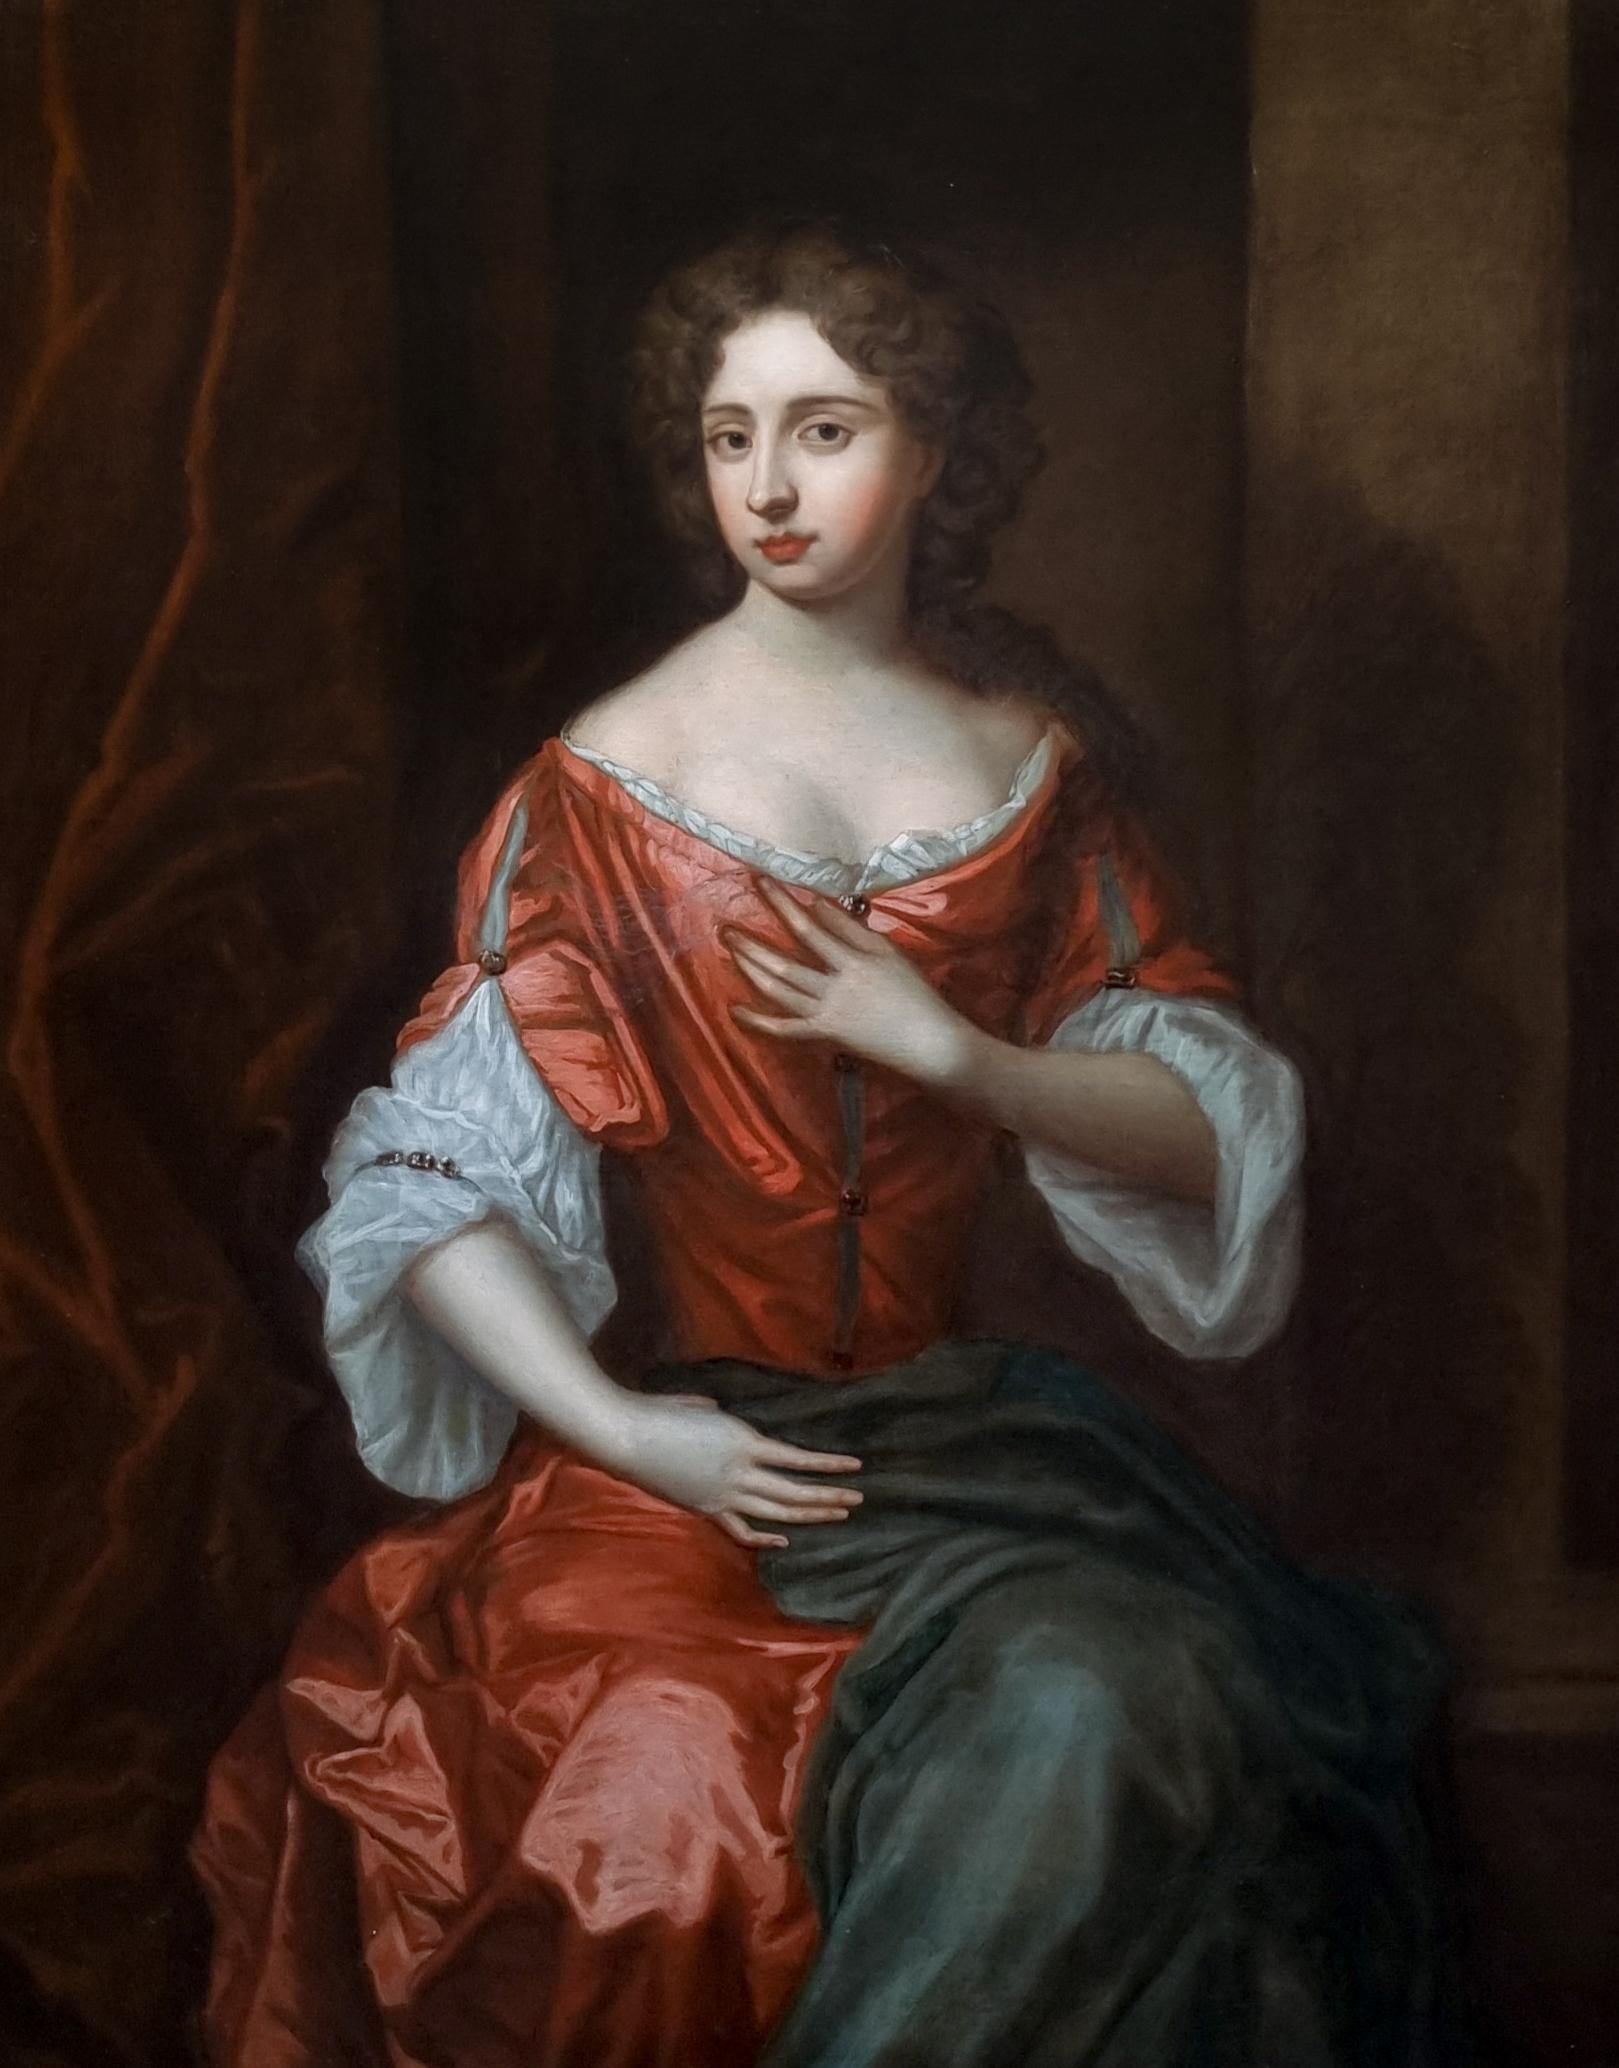 Portrait of a Lady in Red Dress on Porch c.1680, English Aristocratic Provenance - Old Masters Painting by William Wissing